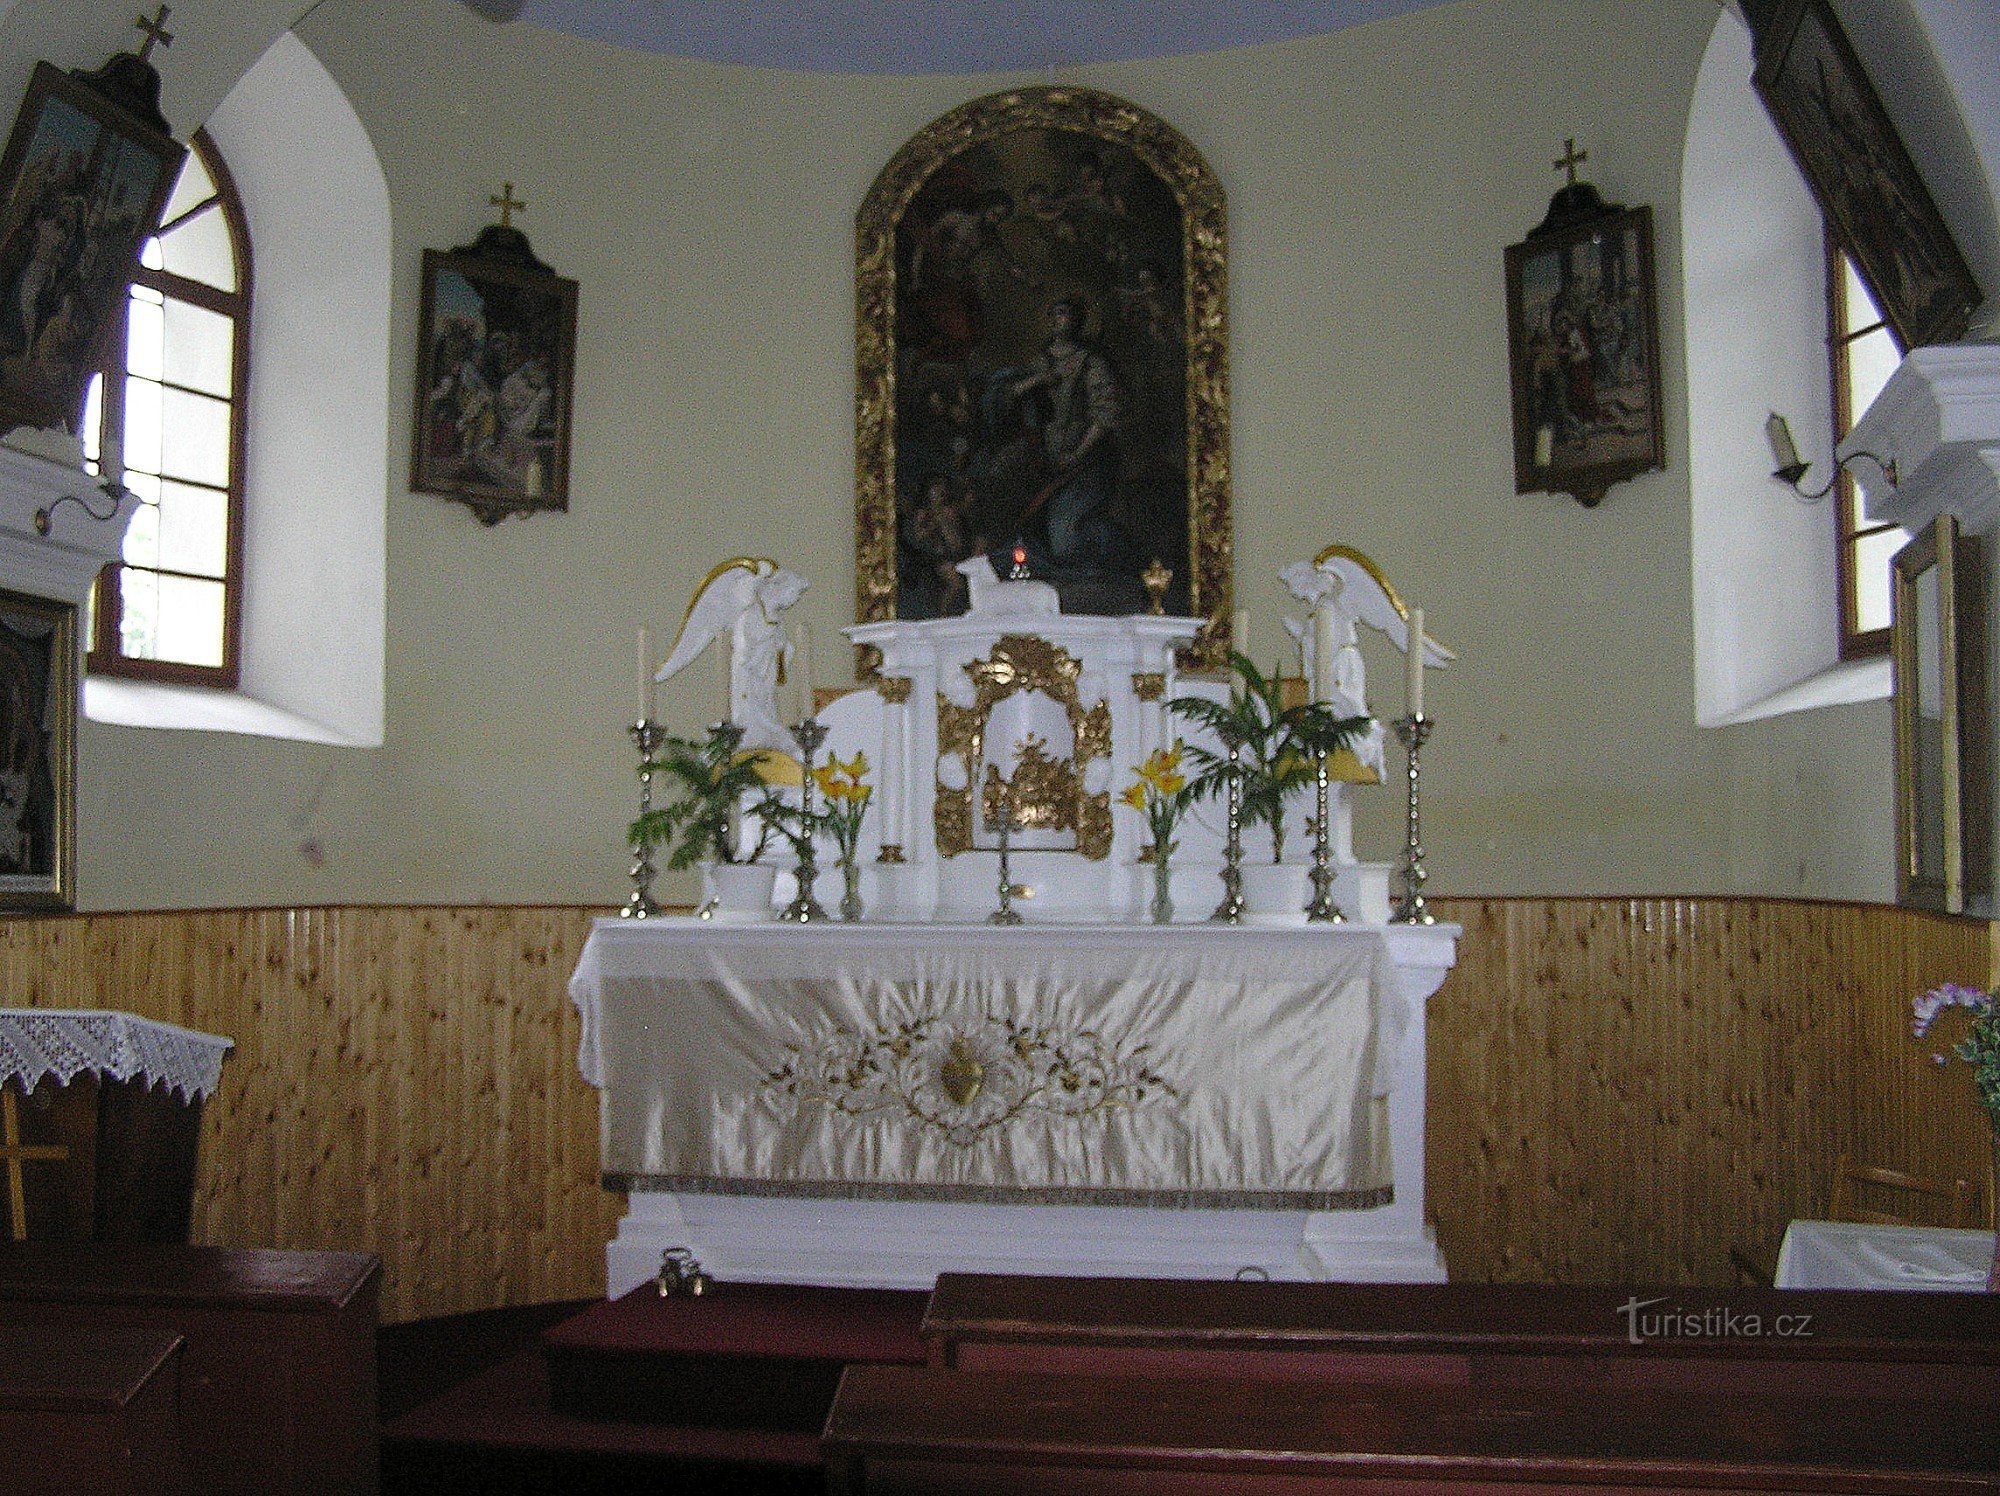 Domoradovice - Chapel of St. Barbory ​​- altar